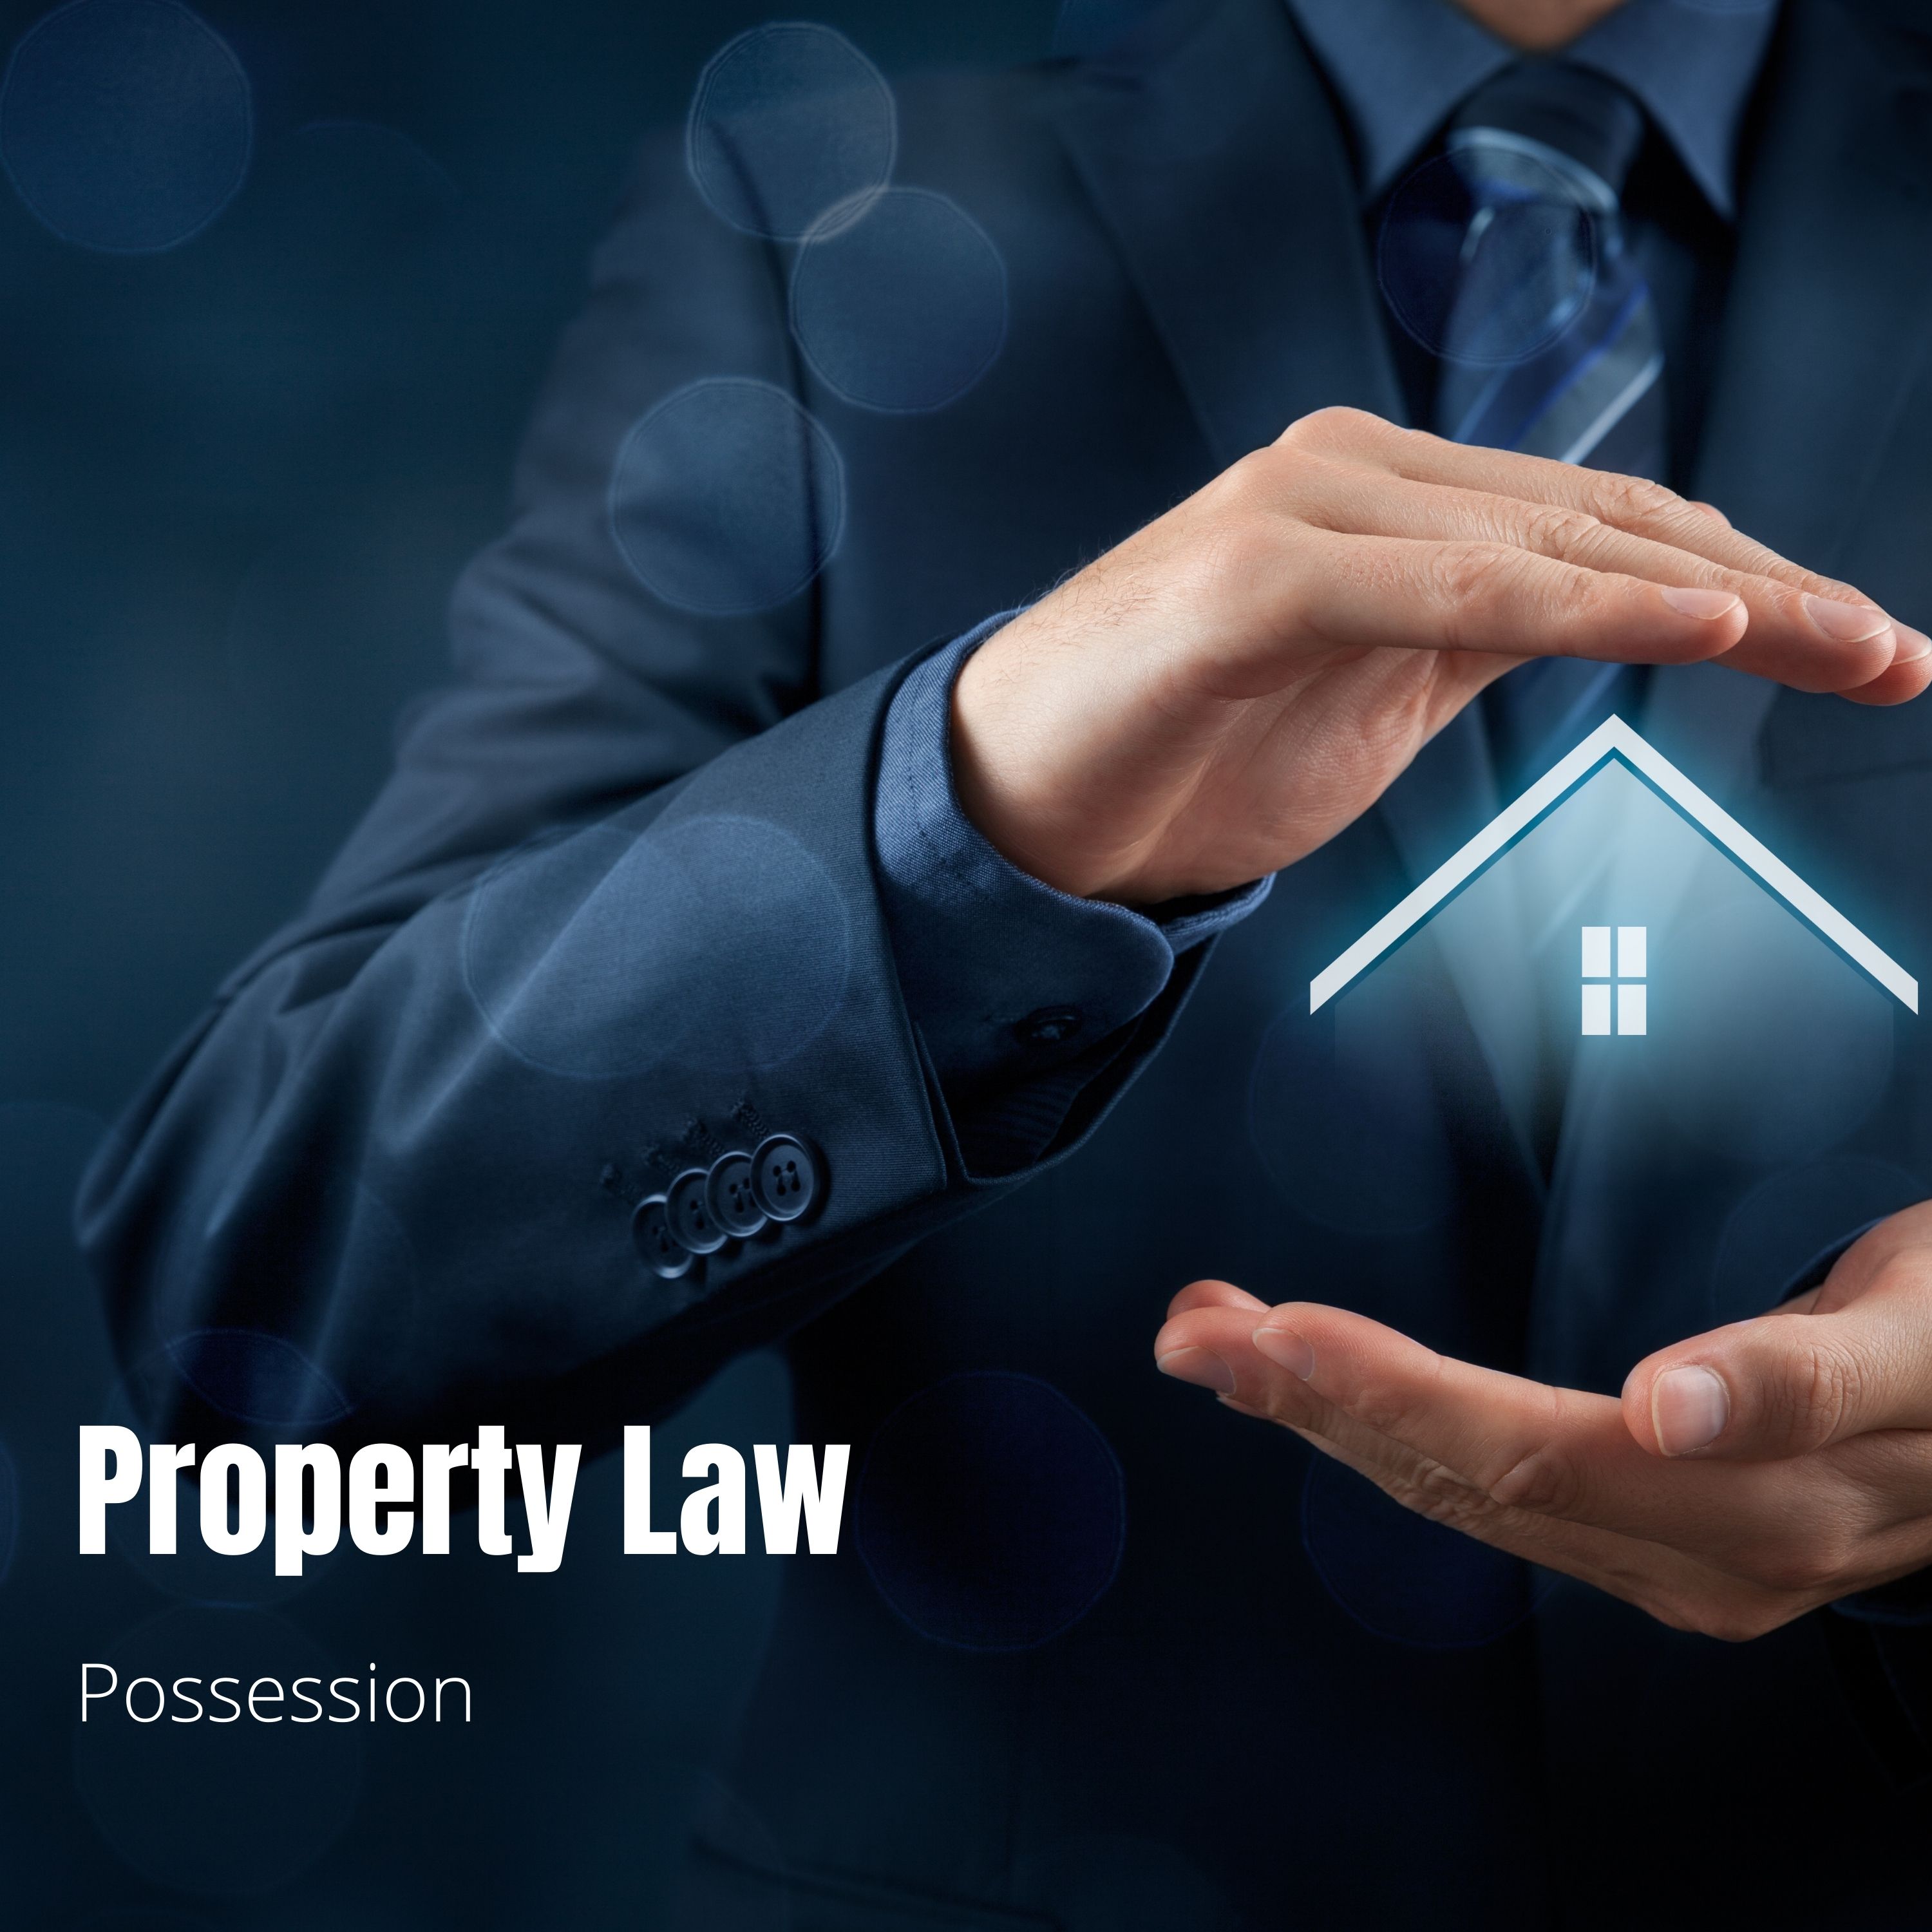 Property Law - Lecture II: Possession